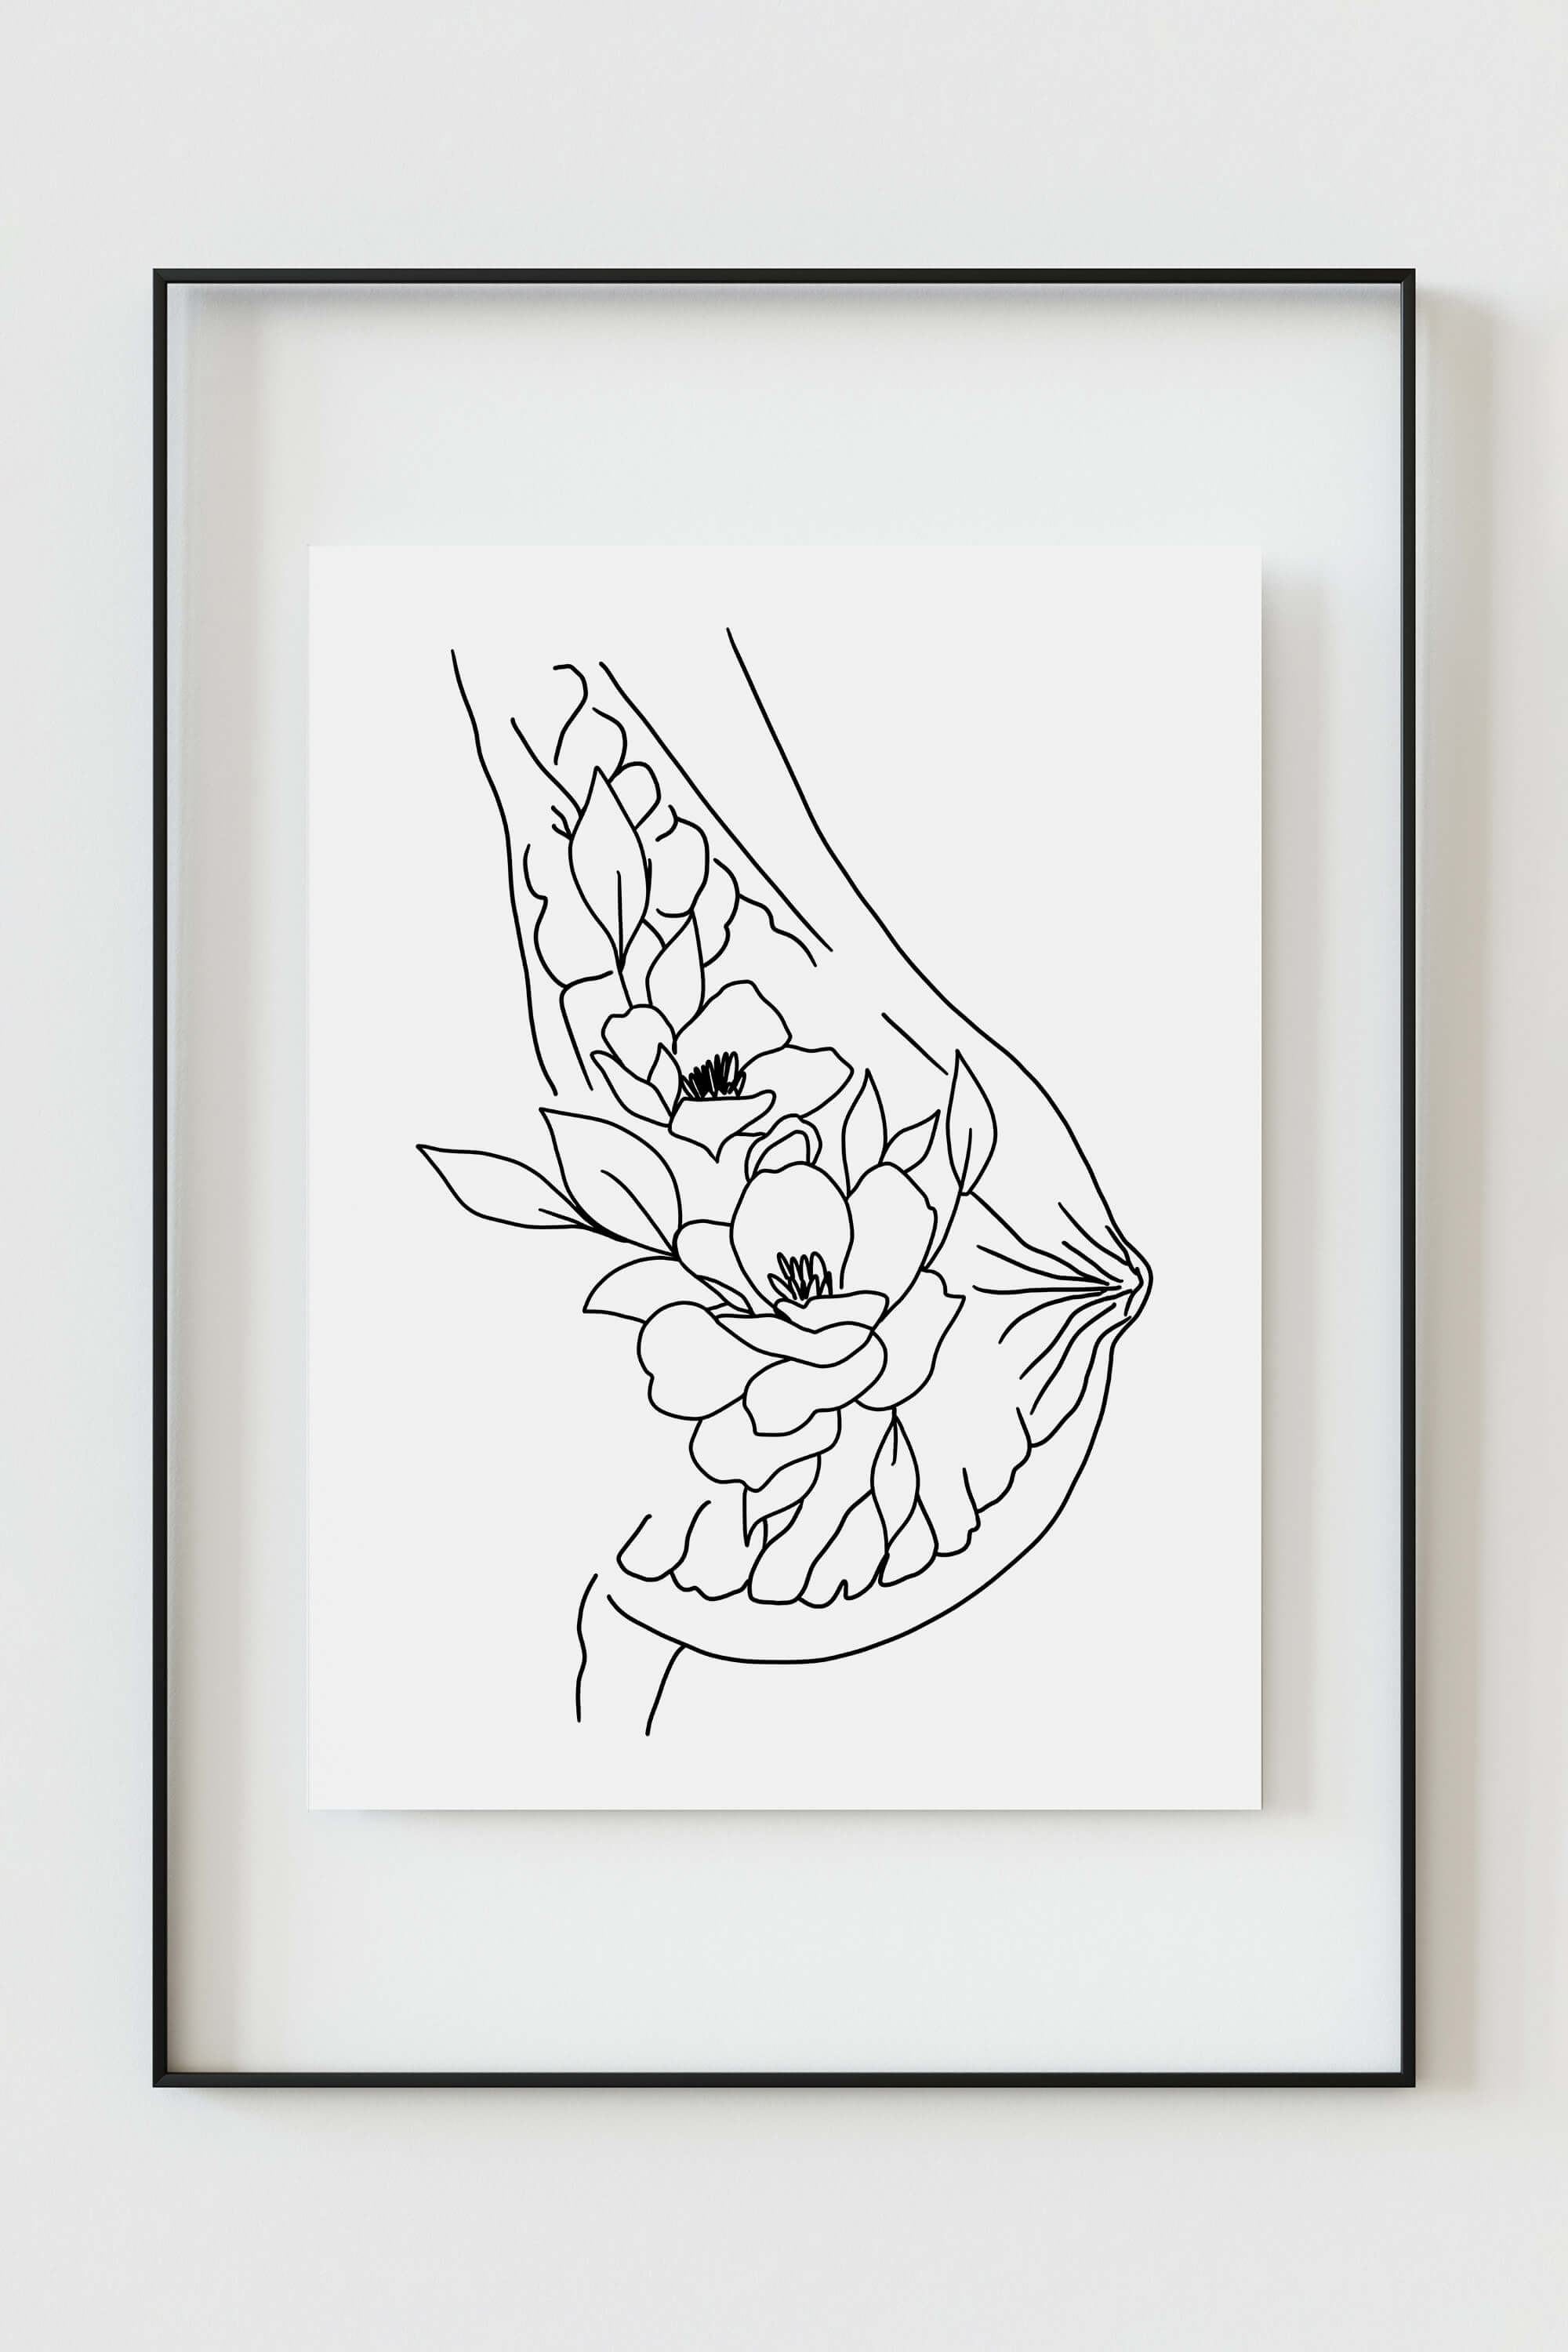 Statement piece breast wall art print sparking meaningful conversations. A blend of floral and anatomical elements, fostering dialogues about diversity and empowerment. Perfect for elevating your space.